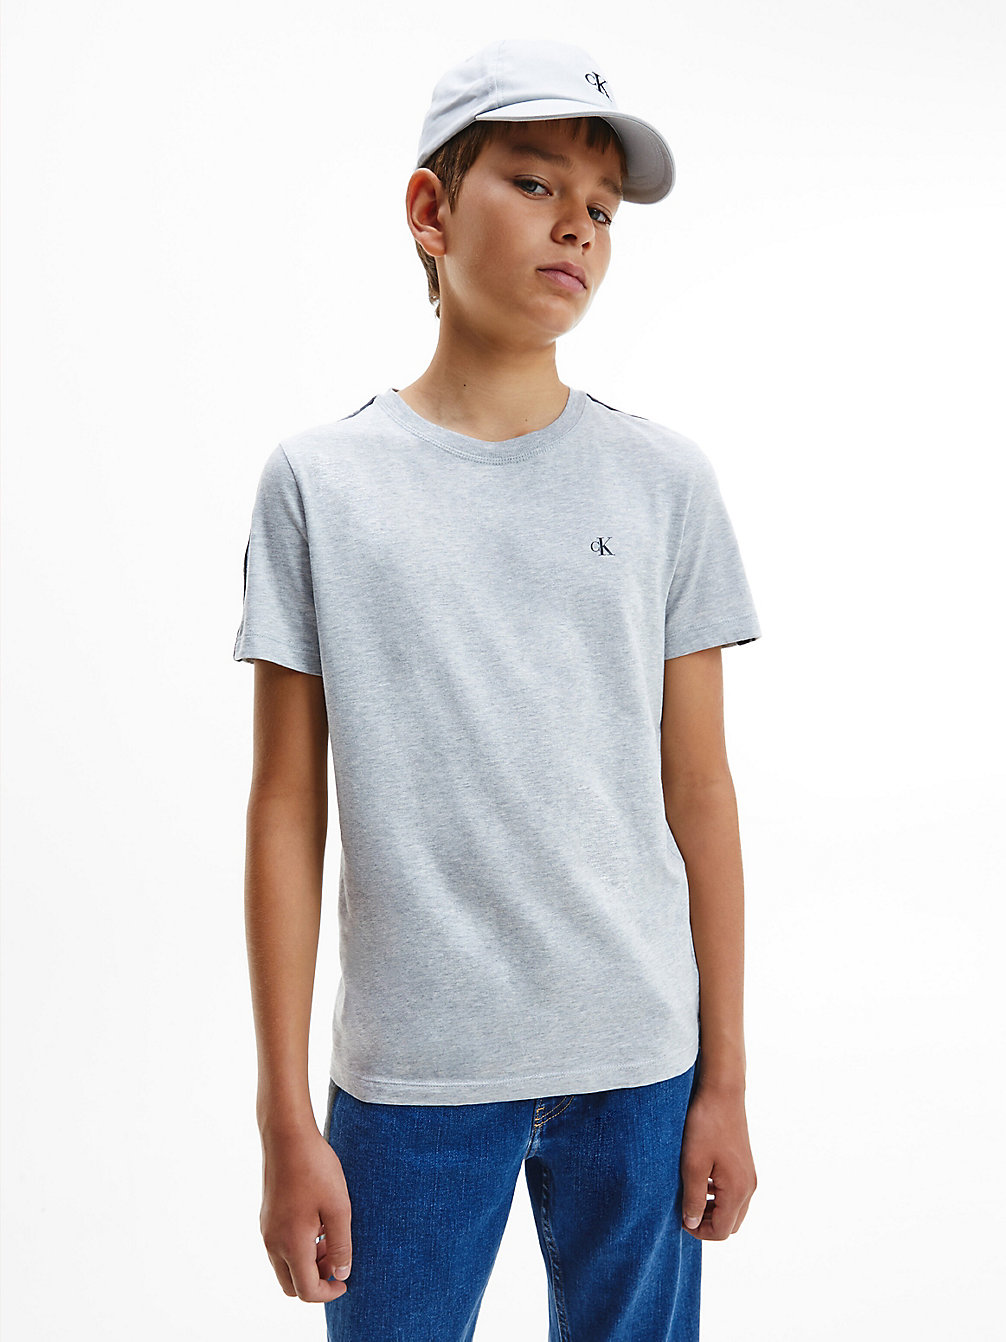 LIGHT GREY HEATHER Fitted Organic Cotton Logo Tape T-Shirt undefined boys Calvin Klein